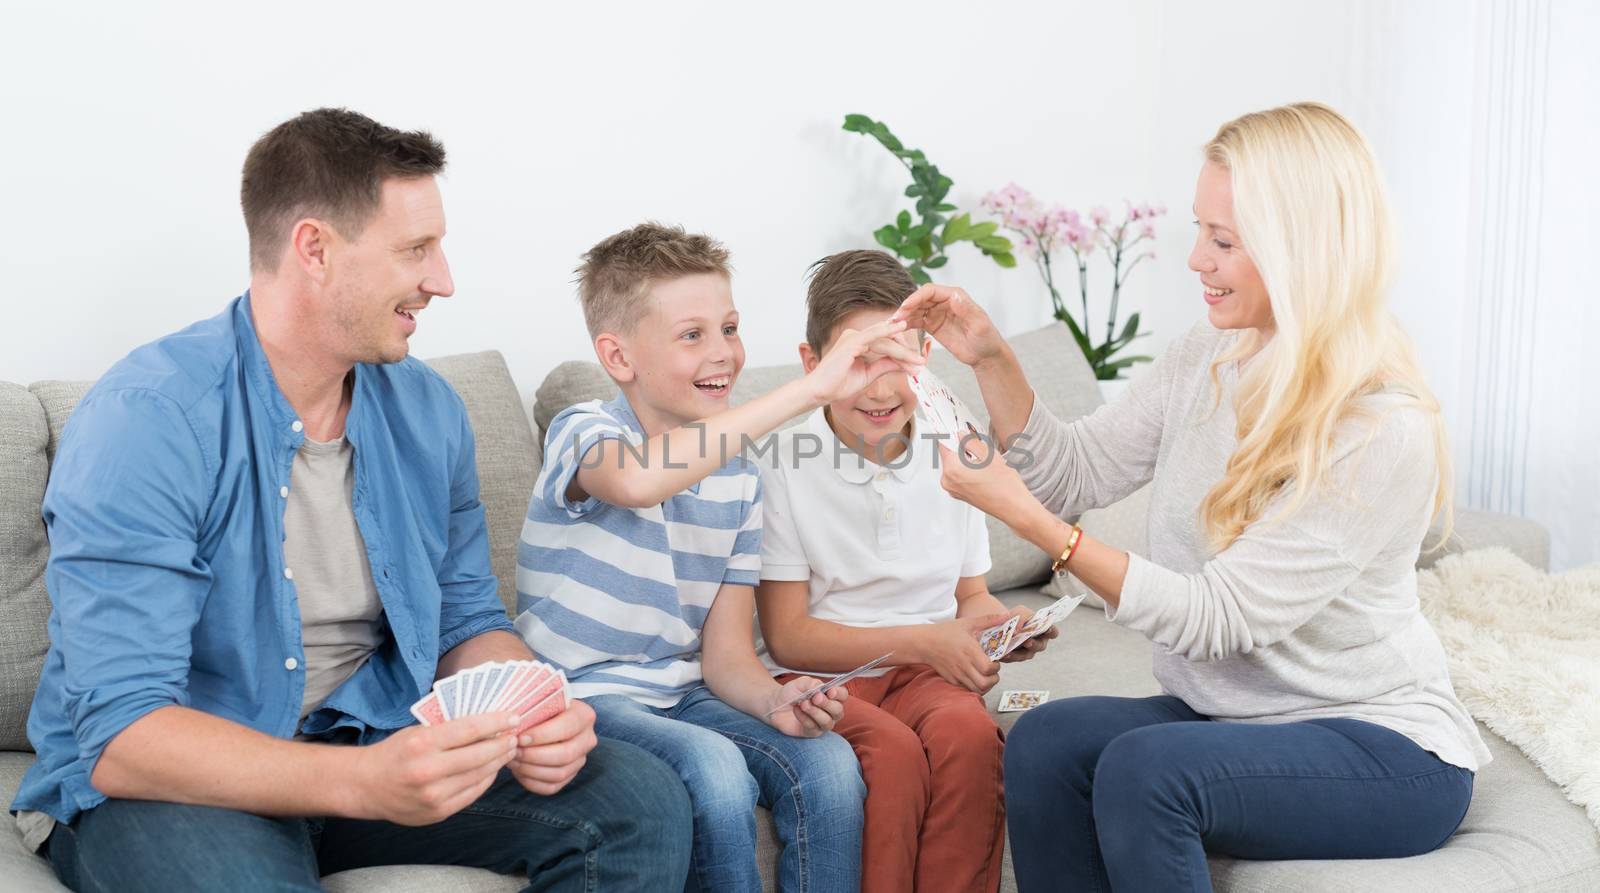 Happy young family playing card game on living room sofa at home. Spending quality leisure time with children and family concept.